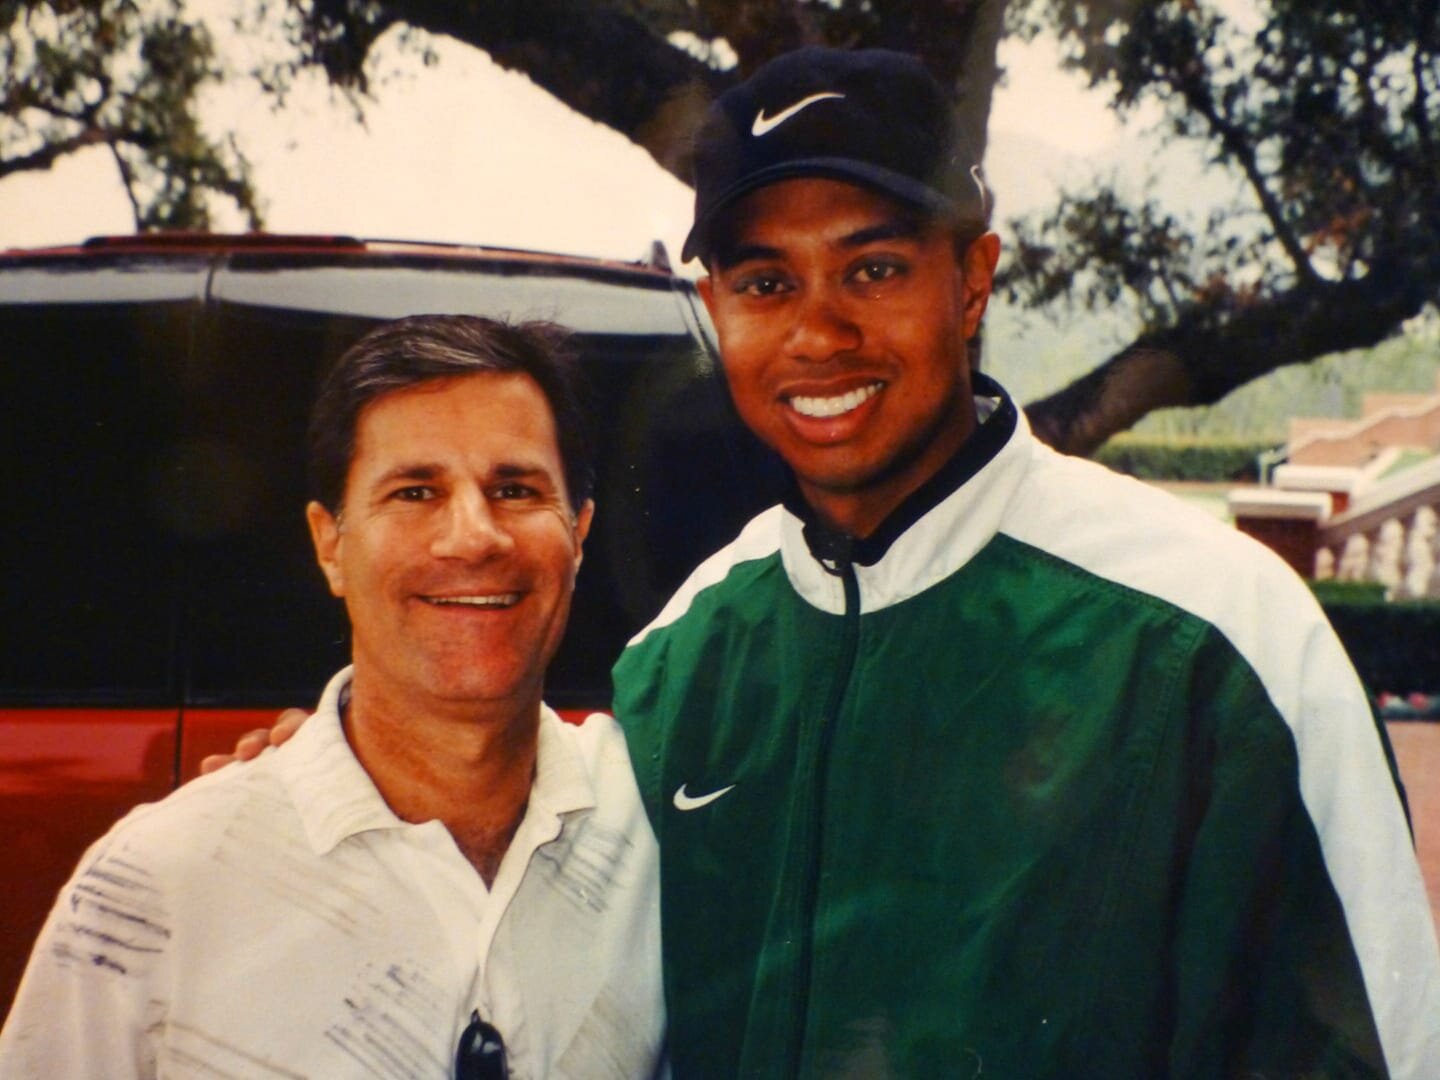 Ted and Tiger 72886919_3007387249278027_7954765459281149952_n.jpg